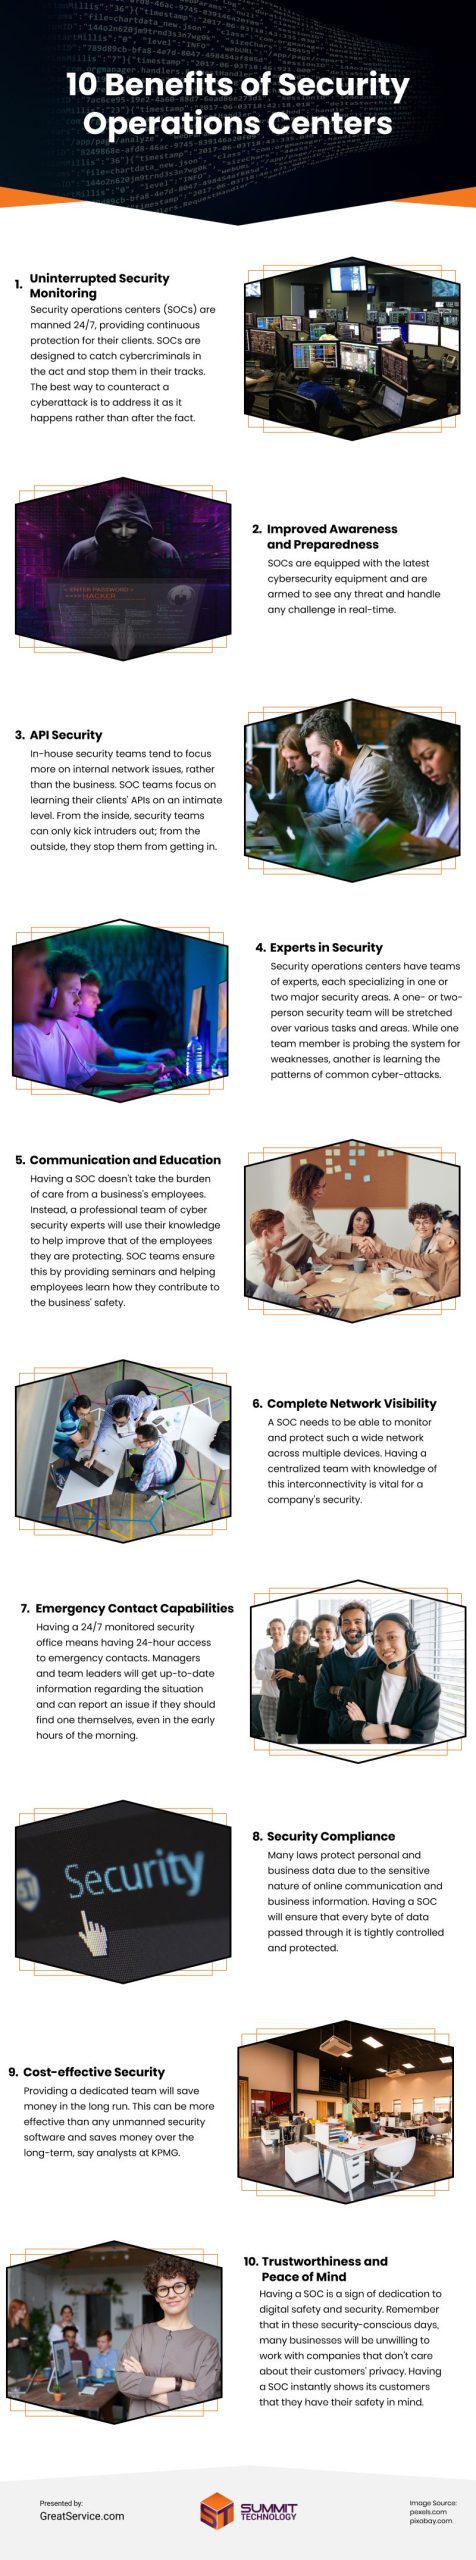 10 Benefits of Security Operations Centers Infographic